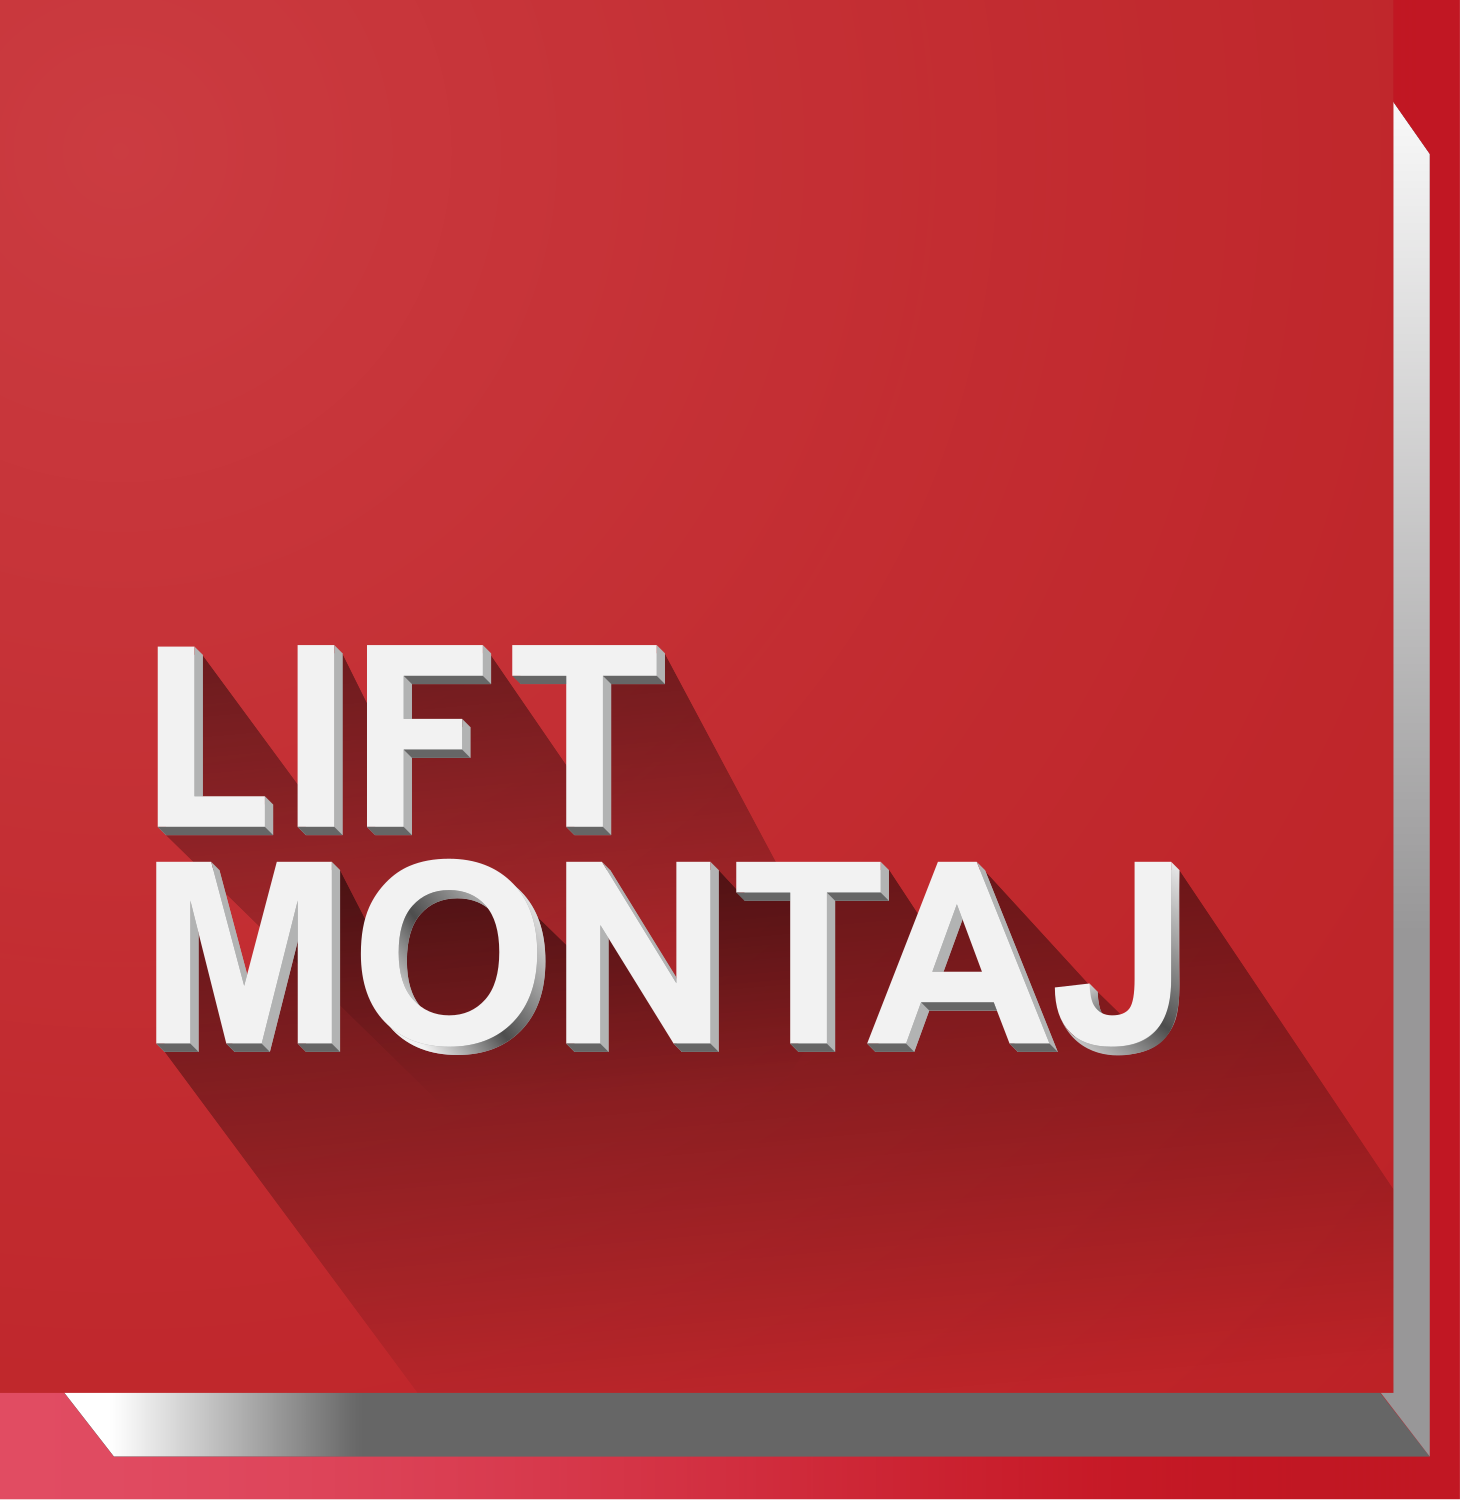 The company  Liftmontaj  was founded in 1973. For a period of more than 45 years, a tremendous experience has been accumulated in the field of installation and maintenance of lifting equipment of varying complexity.